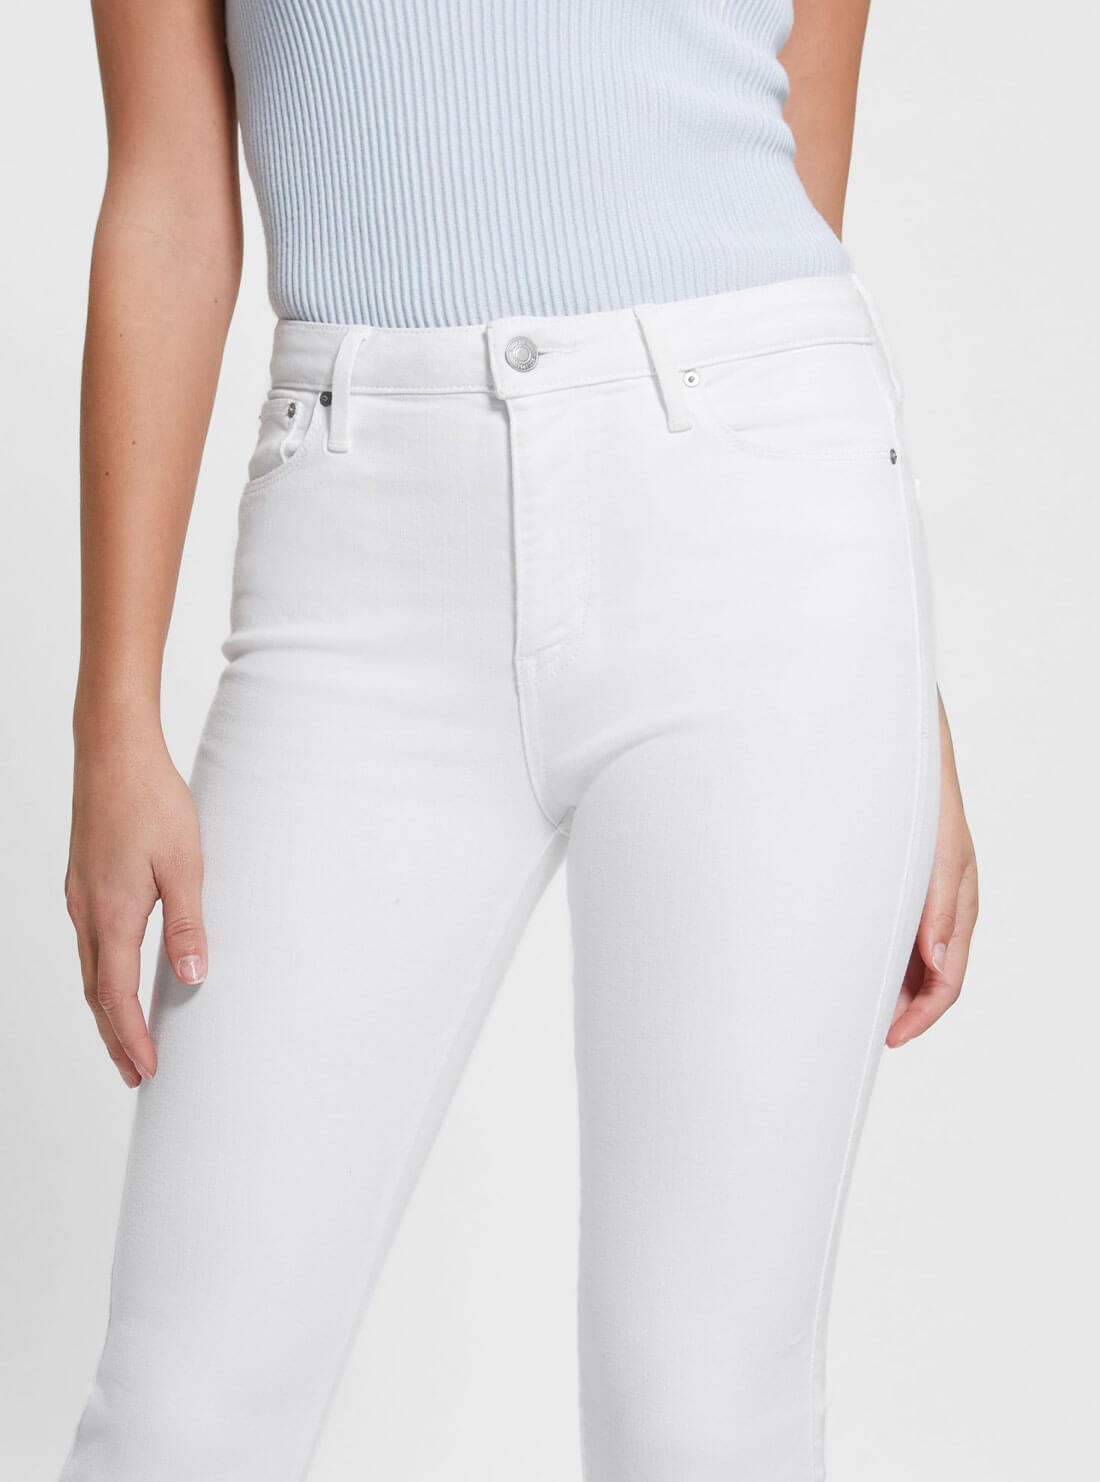  High-Rise Sexy Flare Leg Denim Jeans In Clean White Wash | GUESS Women's Denim | front detail view